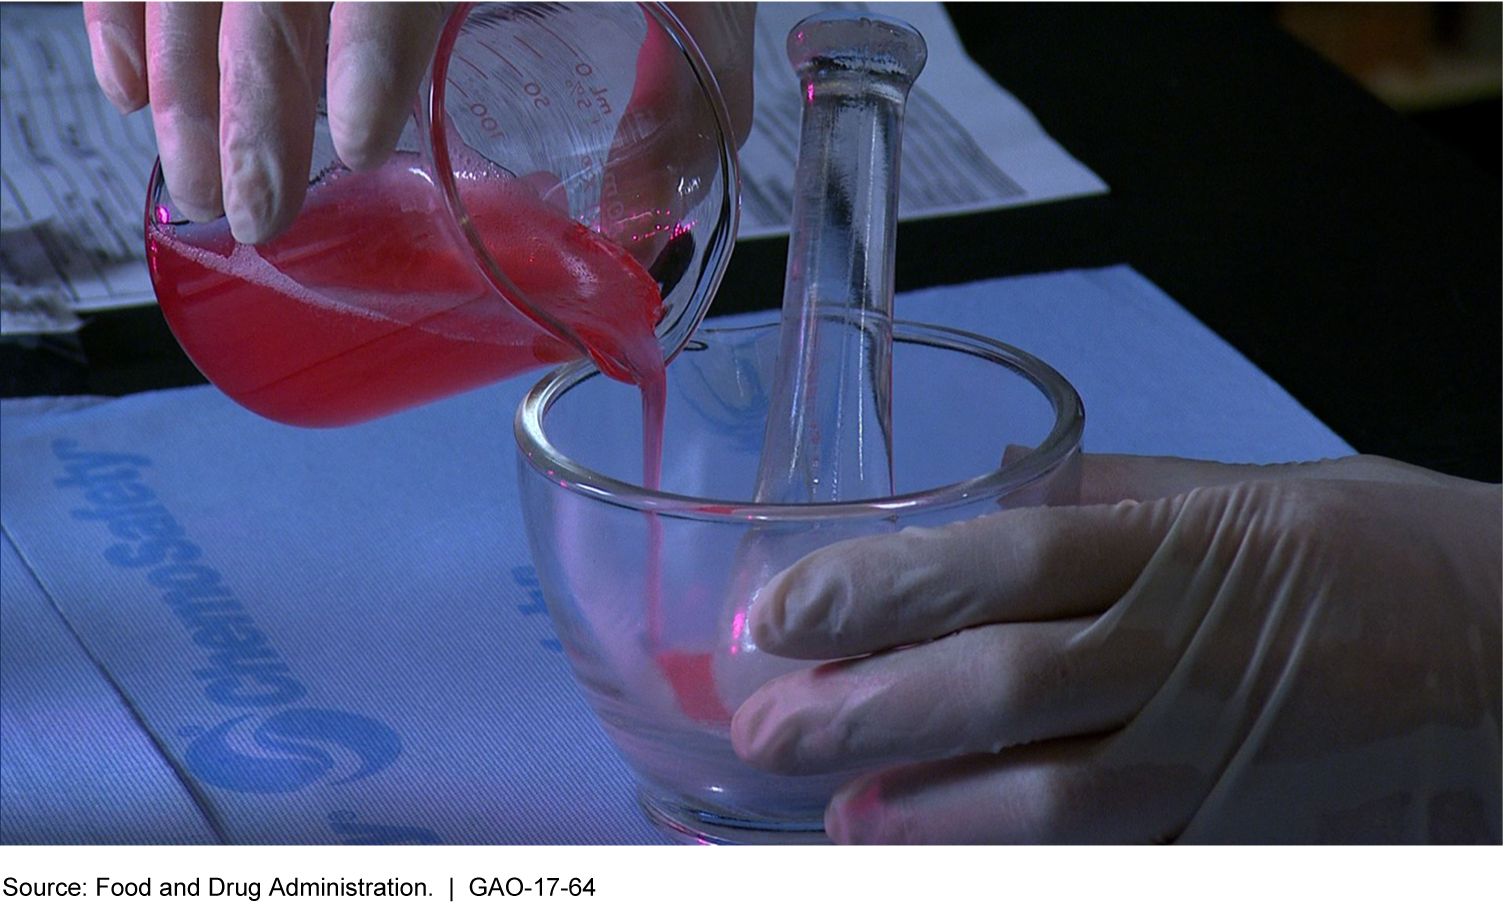 Photo of hands in medical gloves pouring red liquid into a glass mortar and pestle.